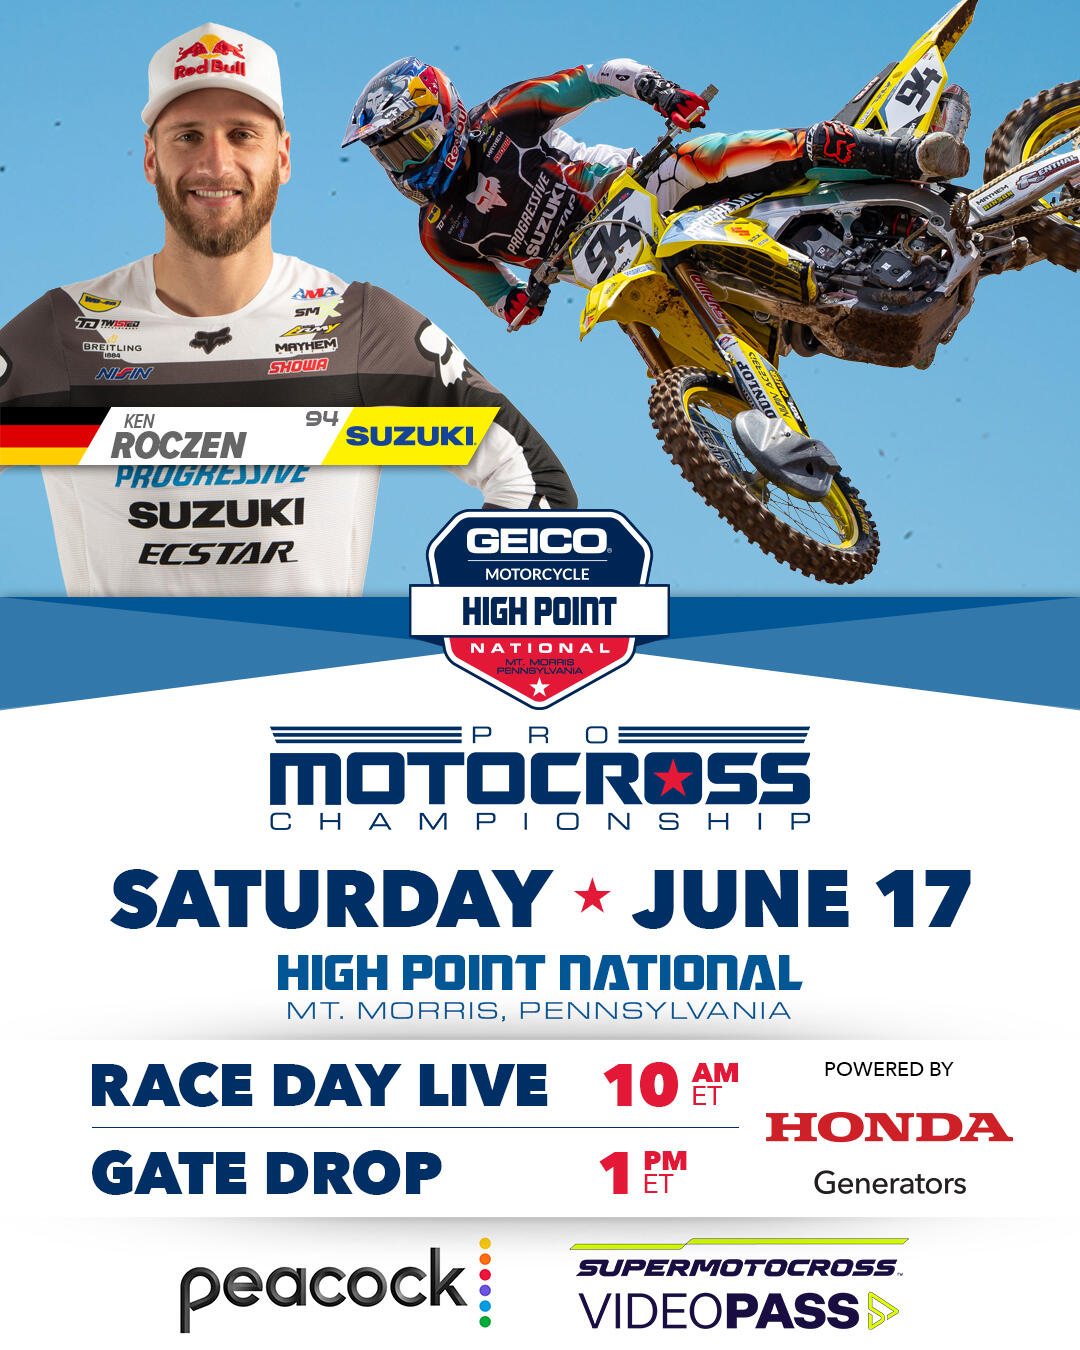 How To Watch GEICO Motorcycle High Point National